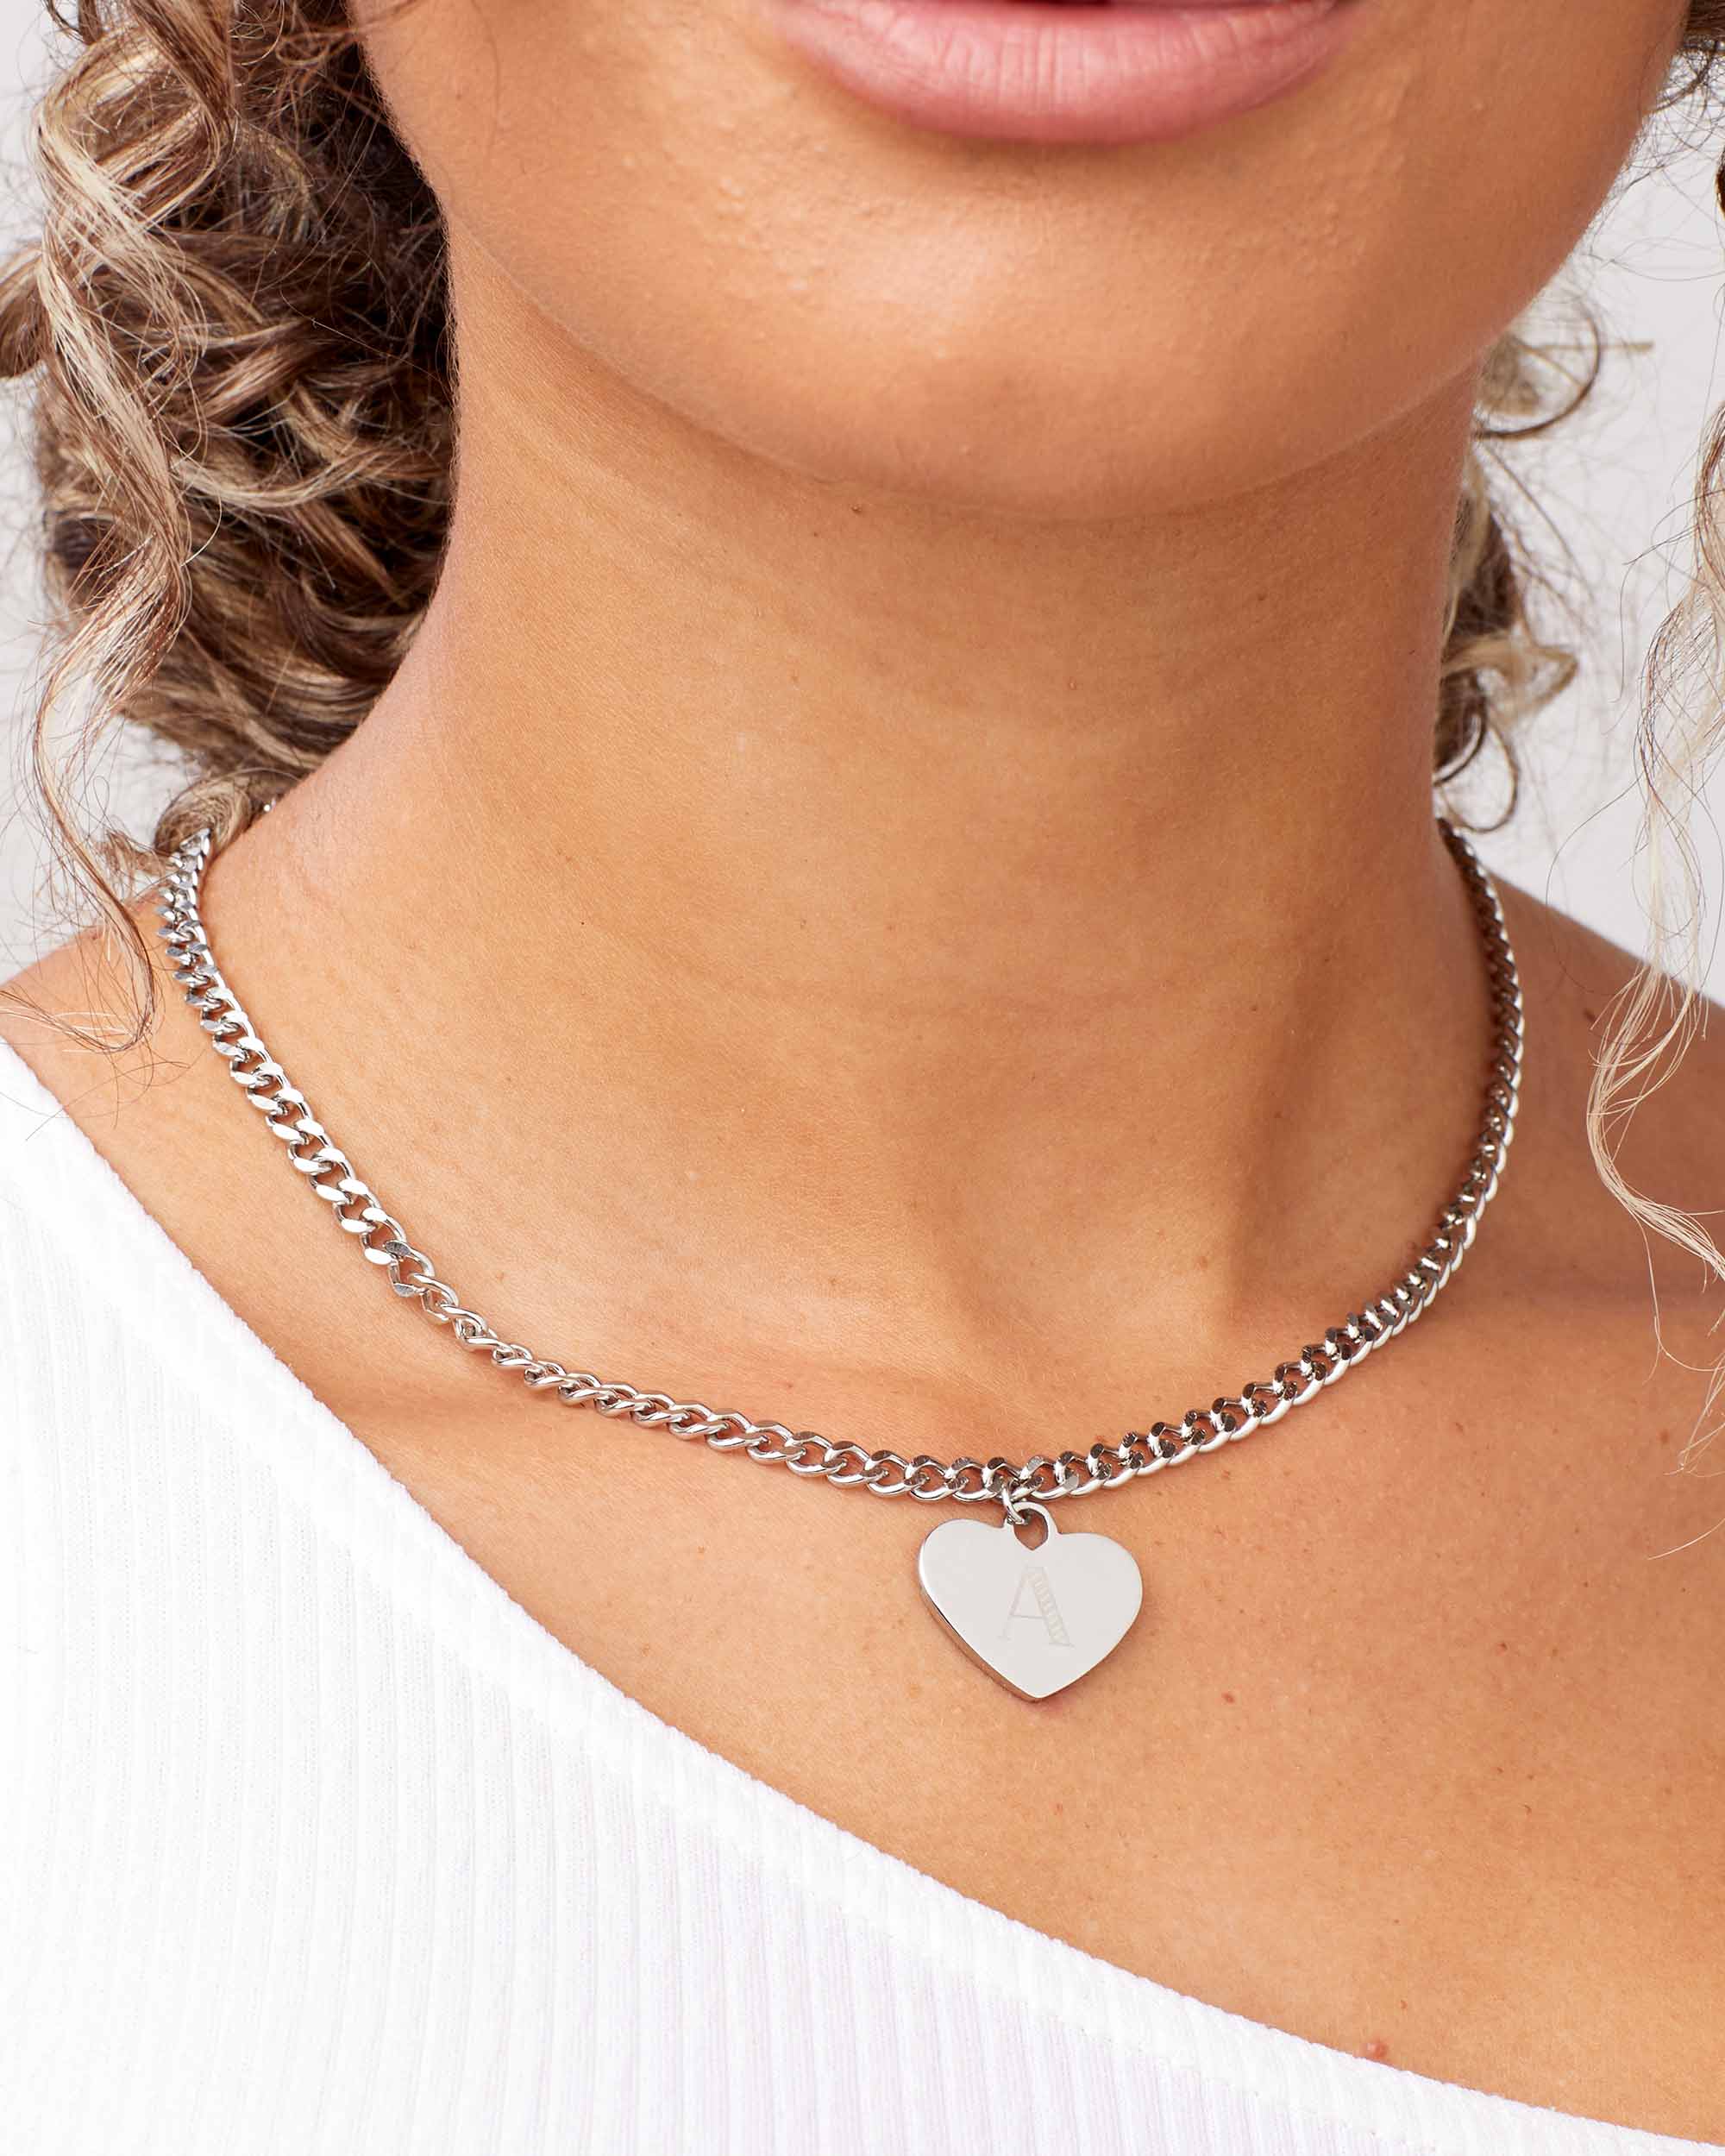 Engraved Initial Loveheart Necklace